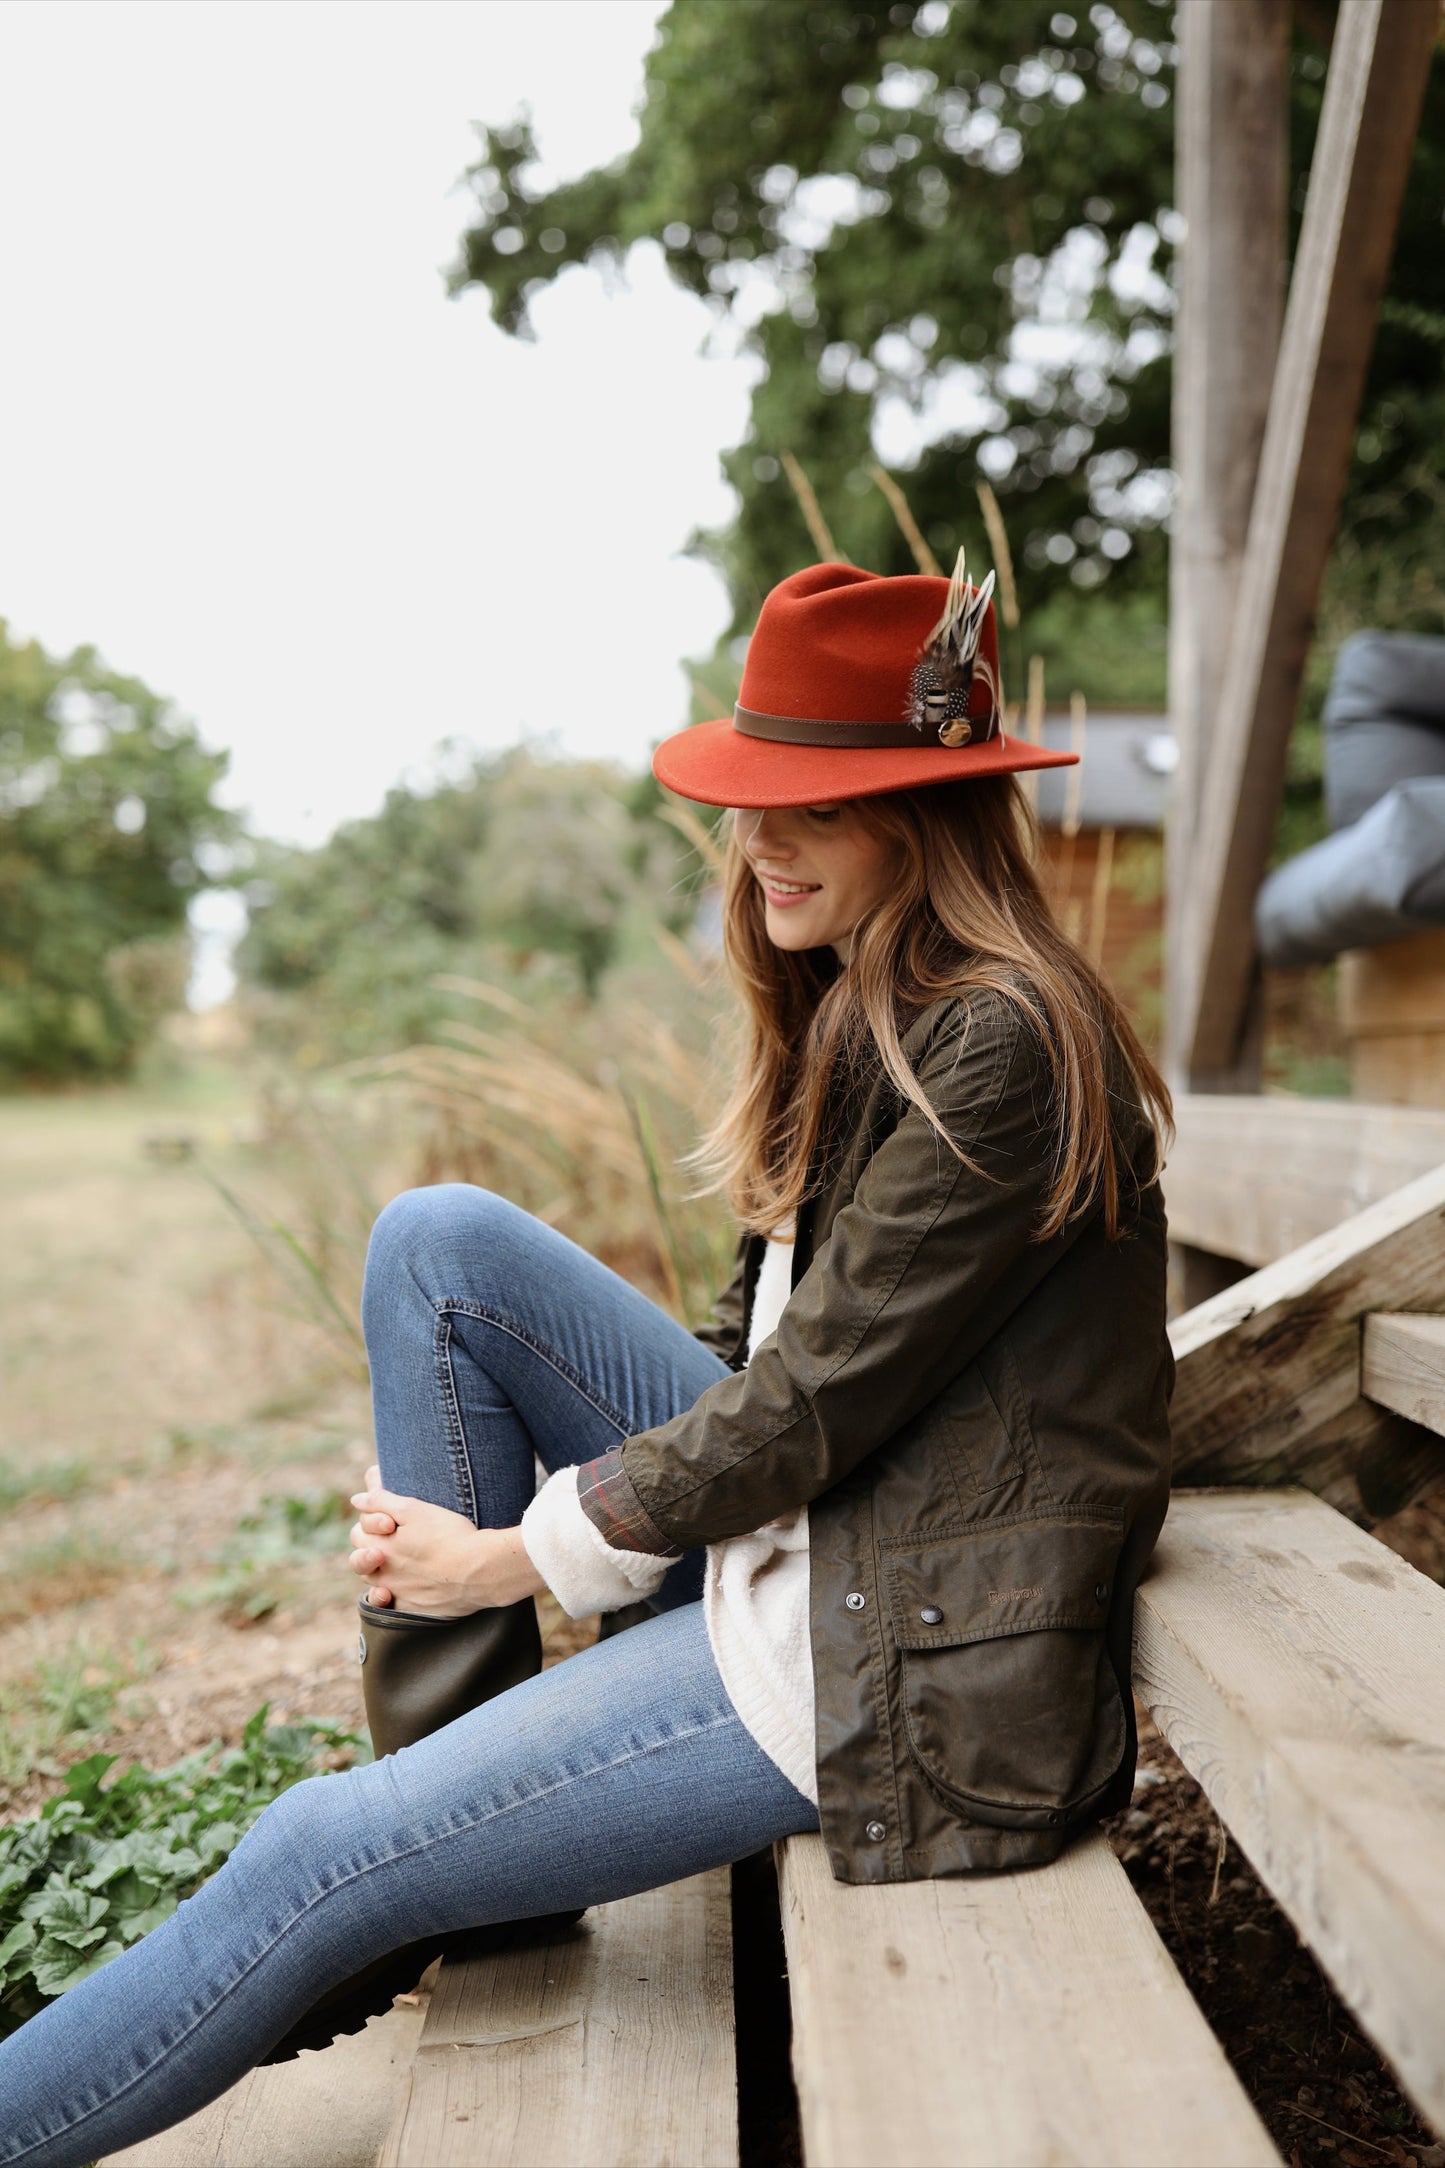 Hicks & Brown The Suffolk Fedora in Cinnamon (Guinea and Pheasant Feather)